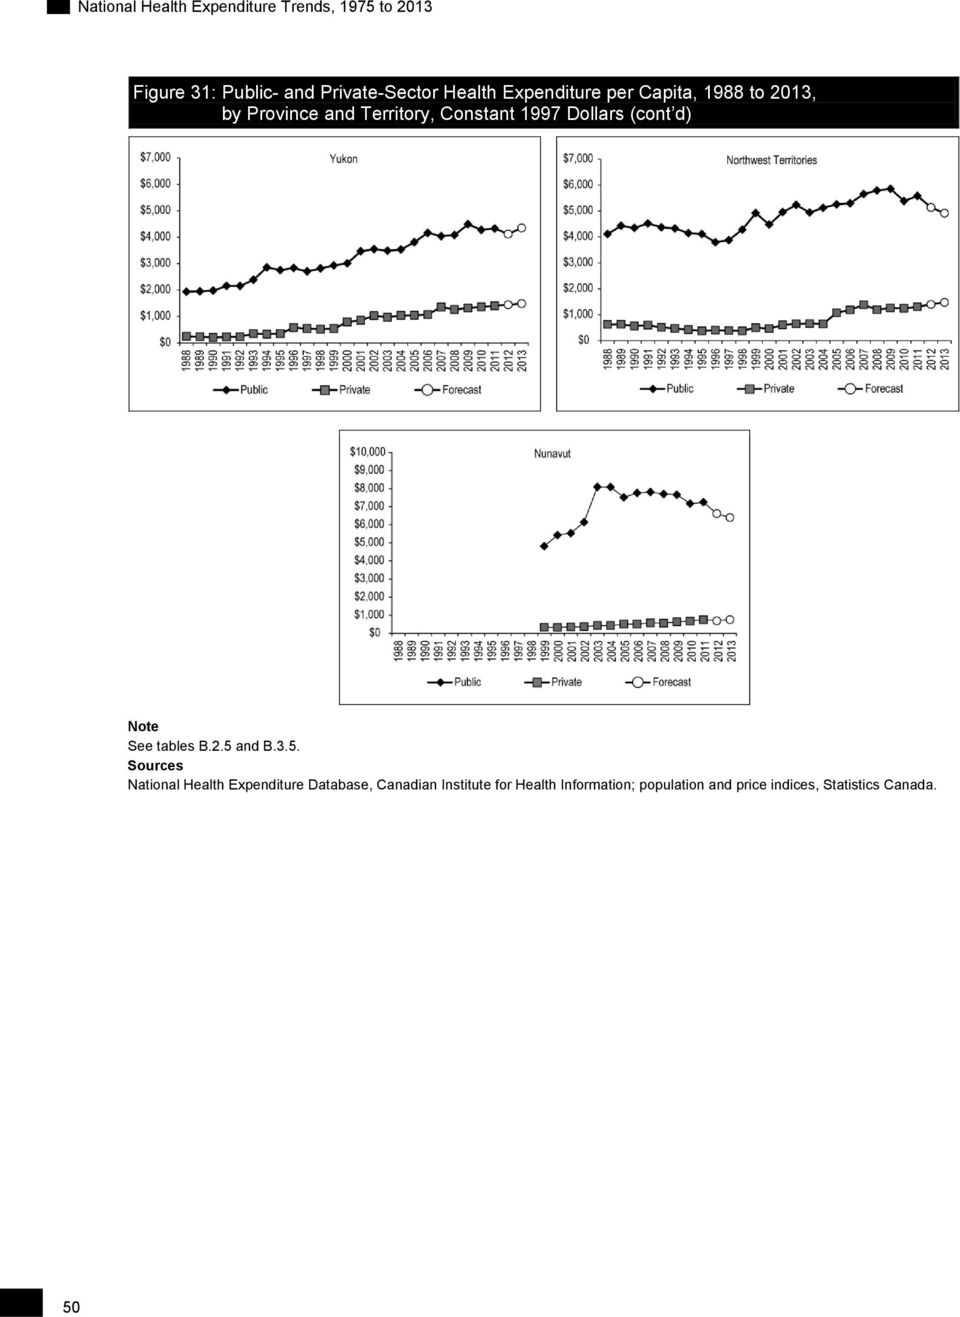 2.5 and B.3.5. Sources National Health Expenditure Database, Canadian